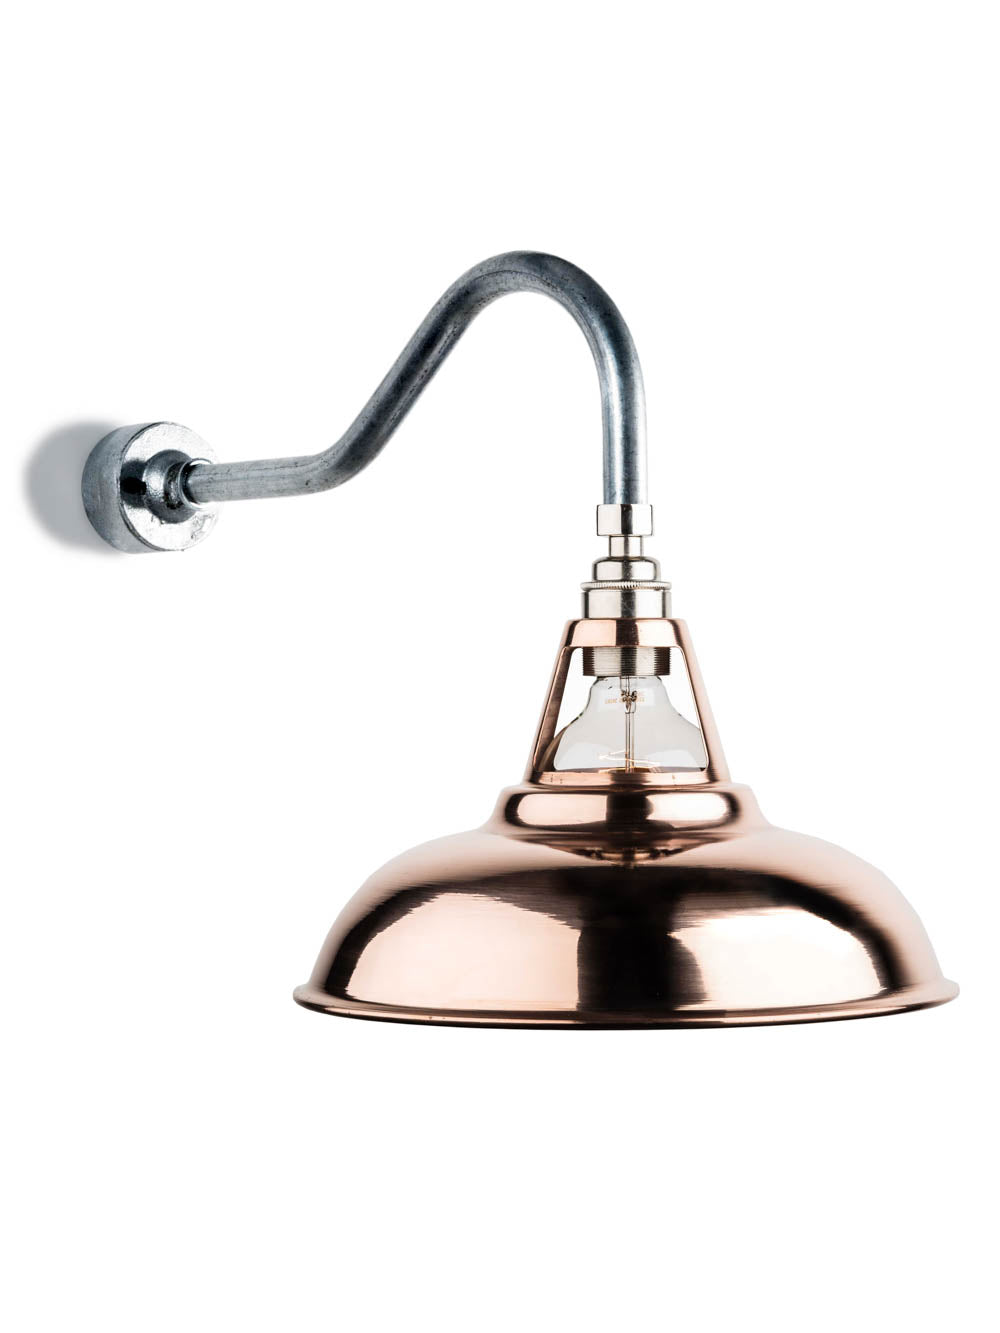 Coolicon Swan Neck Wall Light | Copper Shade | End-Of-Line